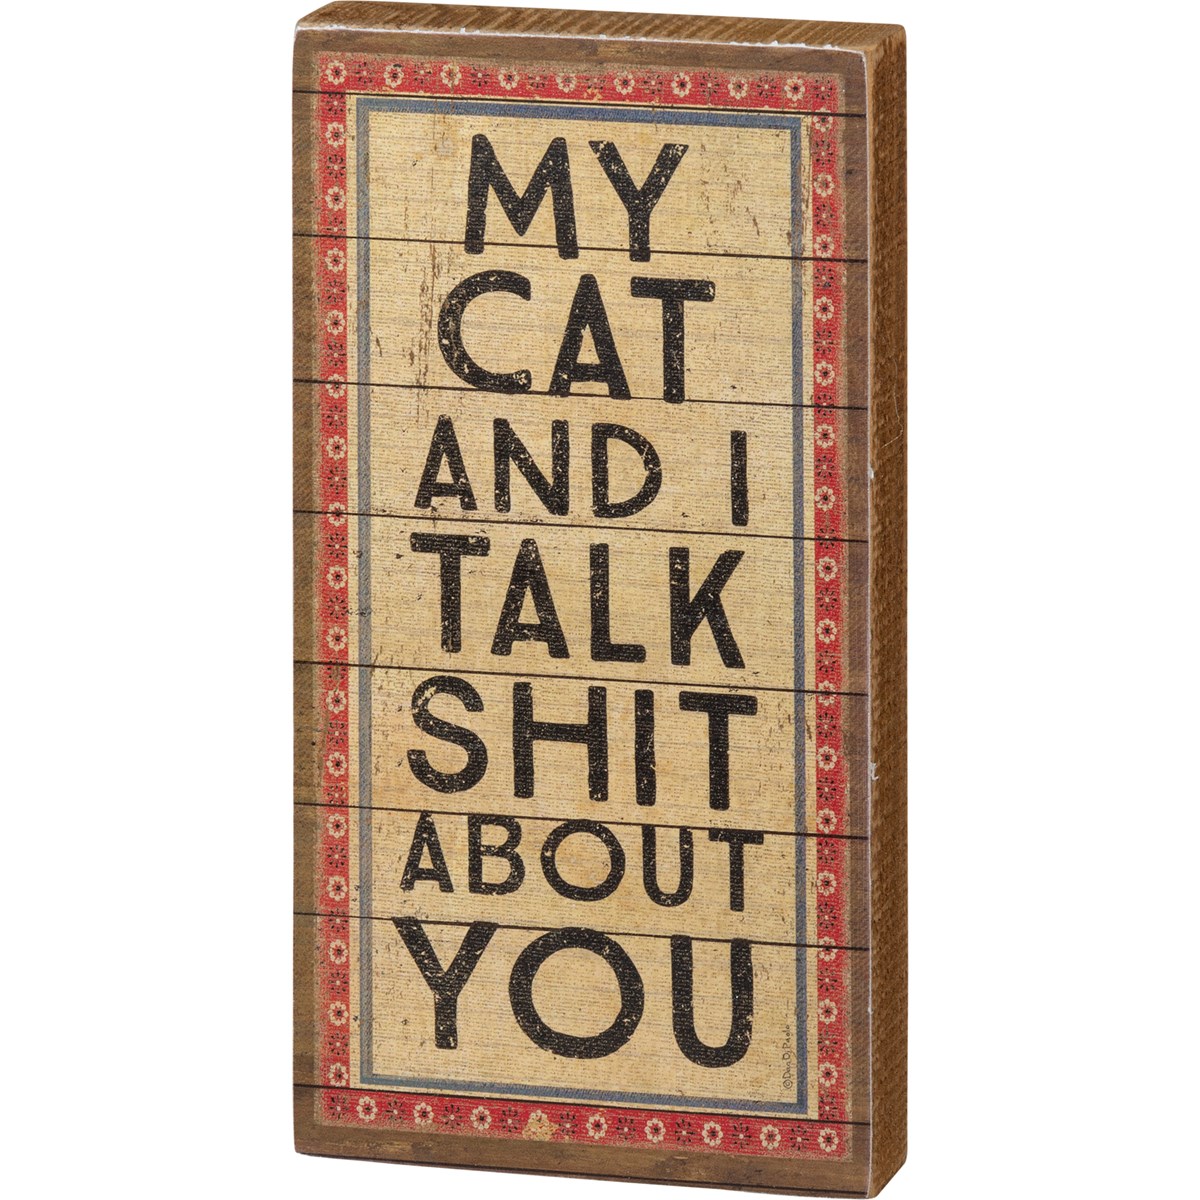 My Cat And I Talk About You Block Sign - Wood, Paper